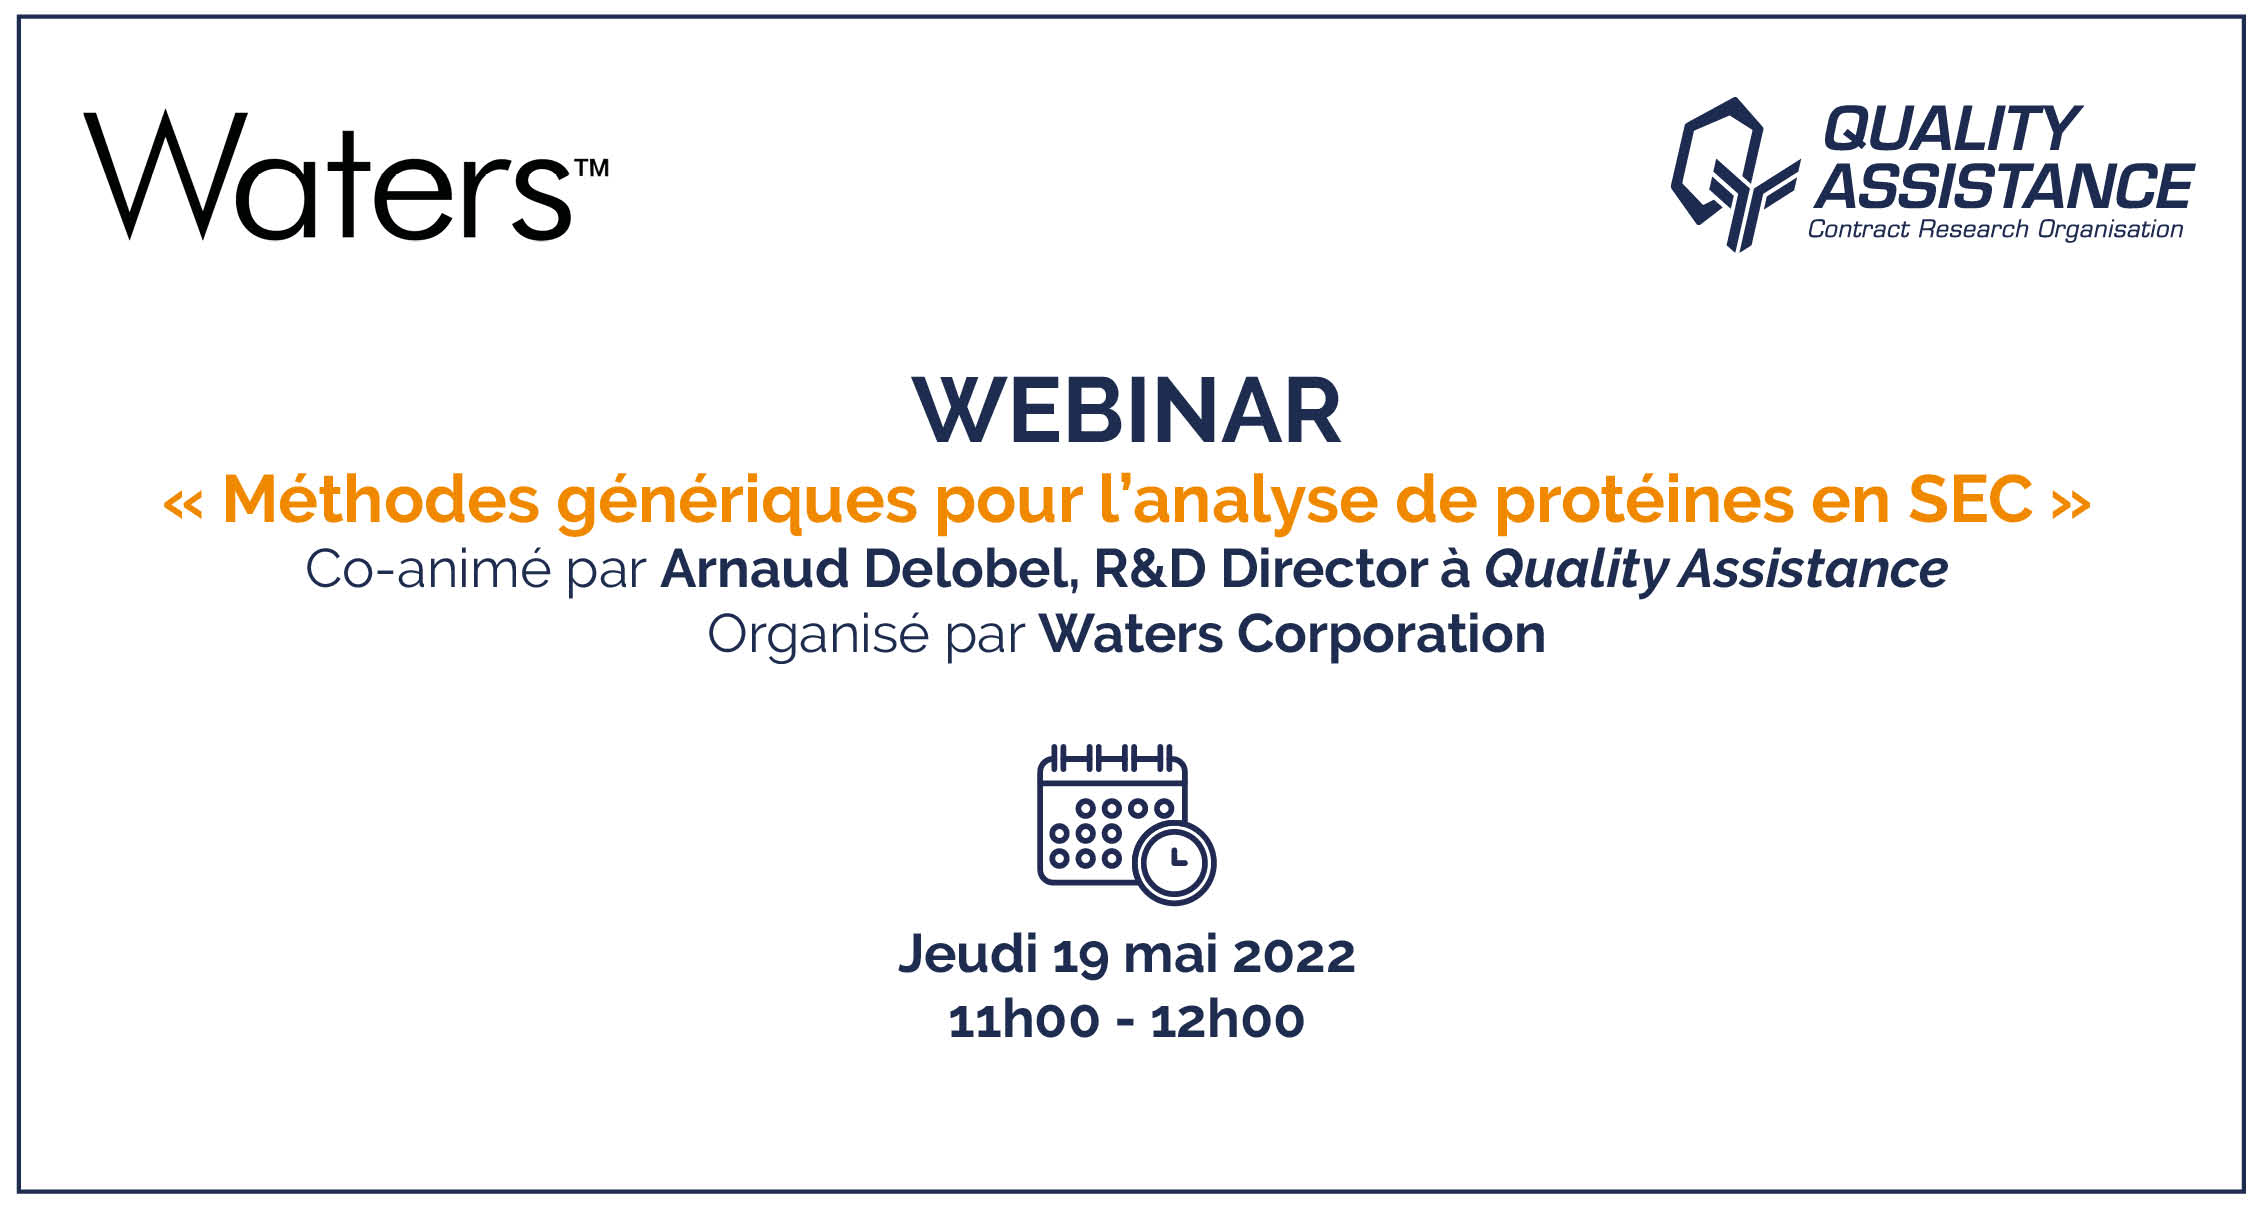 Webinar-Waters-Quality-Assistance